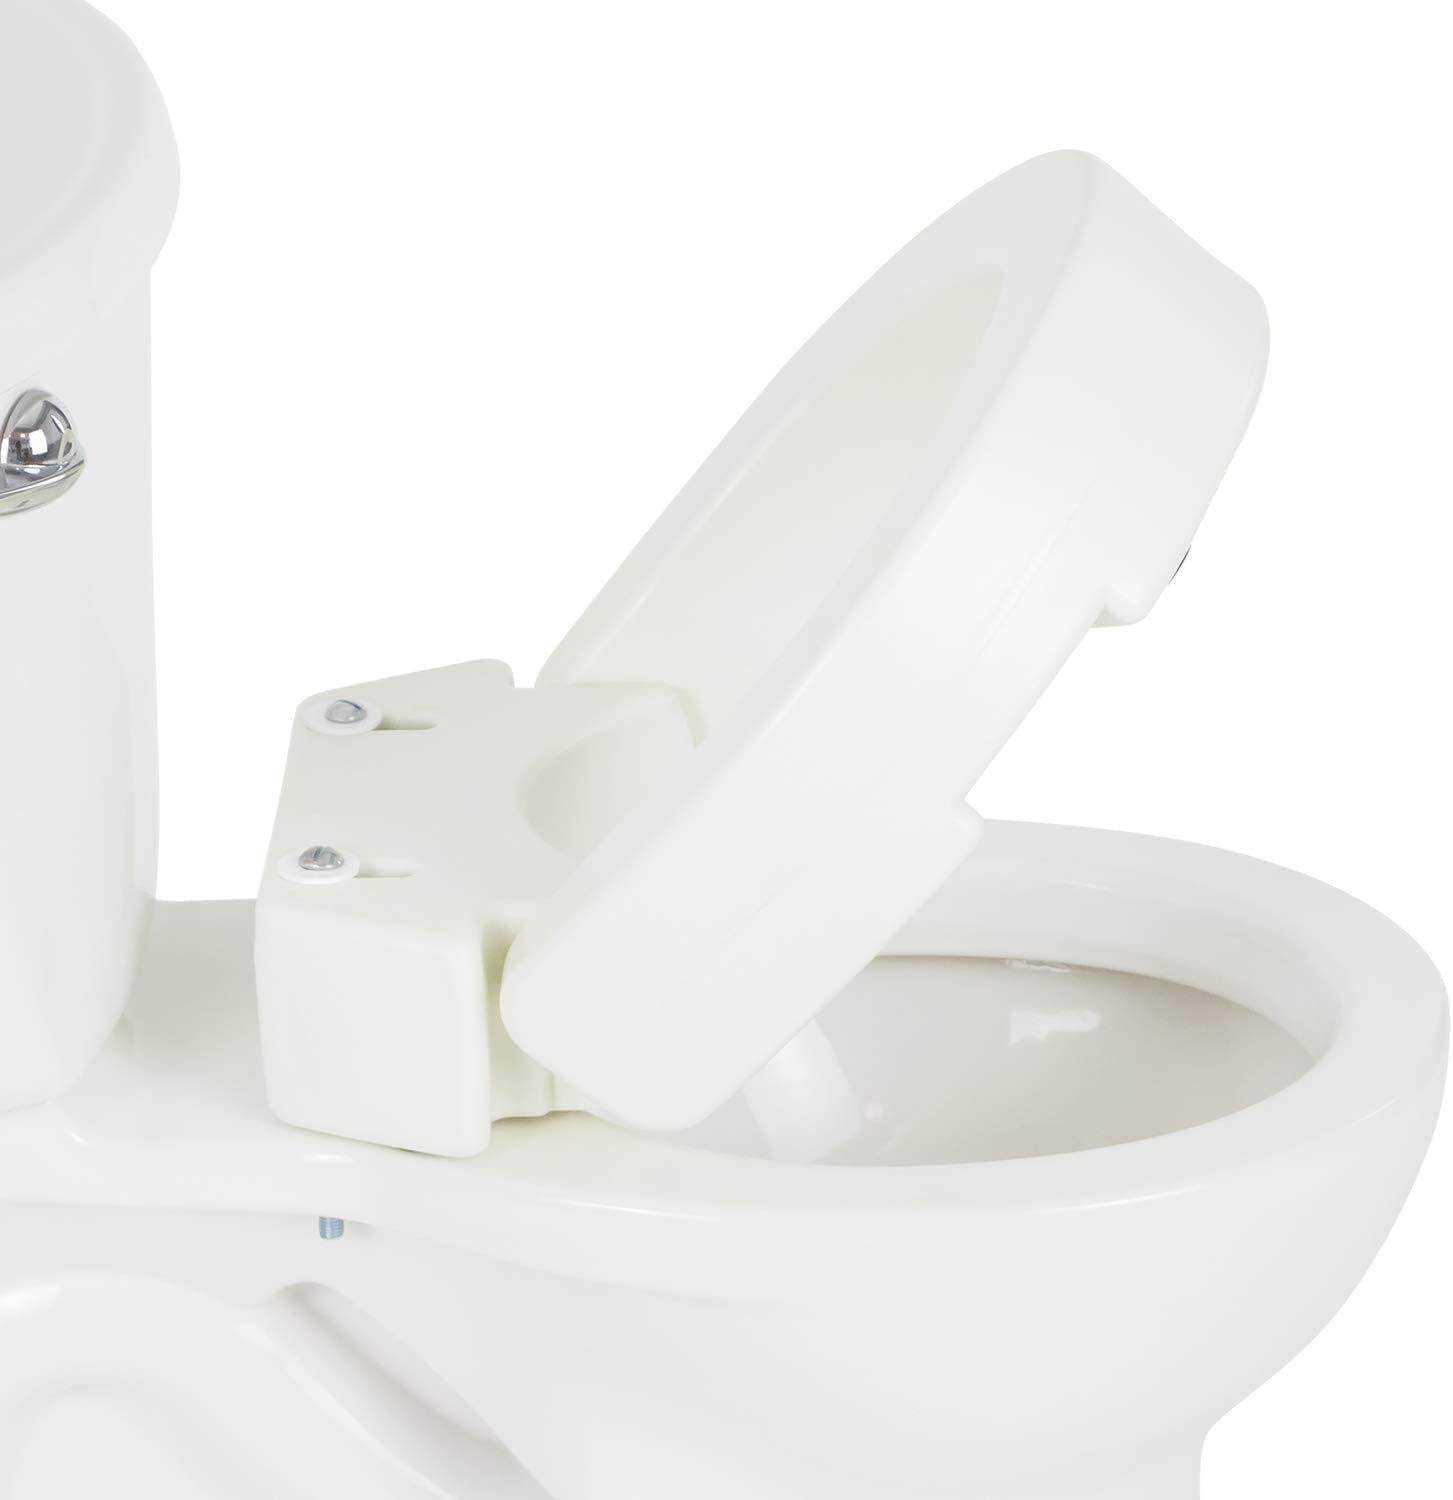 Primary image for Vive Toilet Seat Riser For Seniors, Elderly, And Handicapped People - Raised